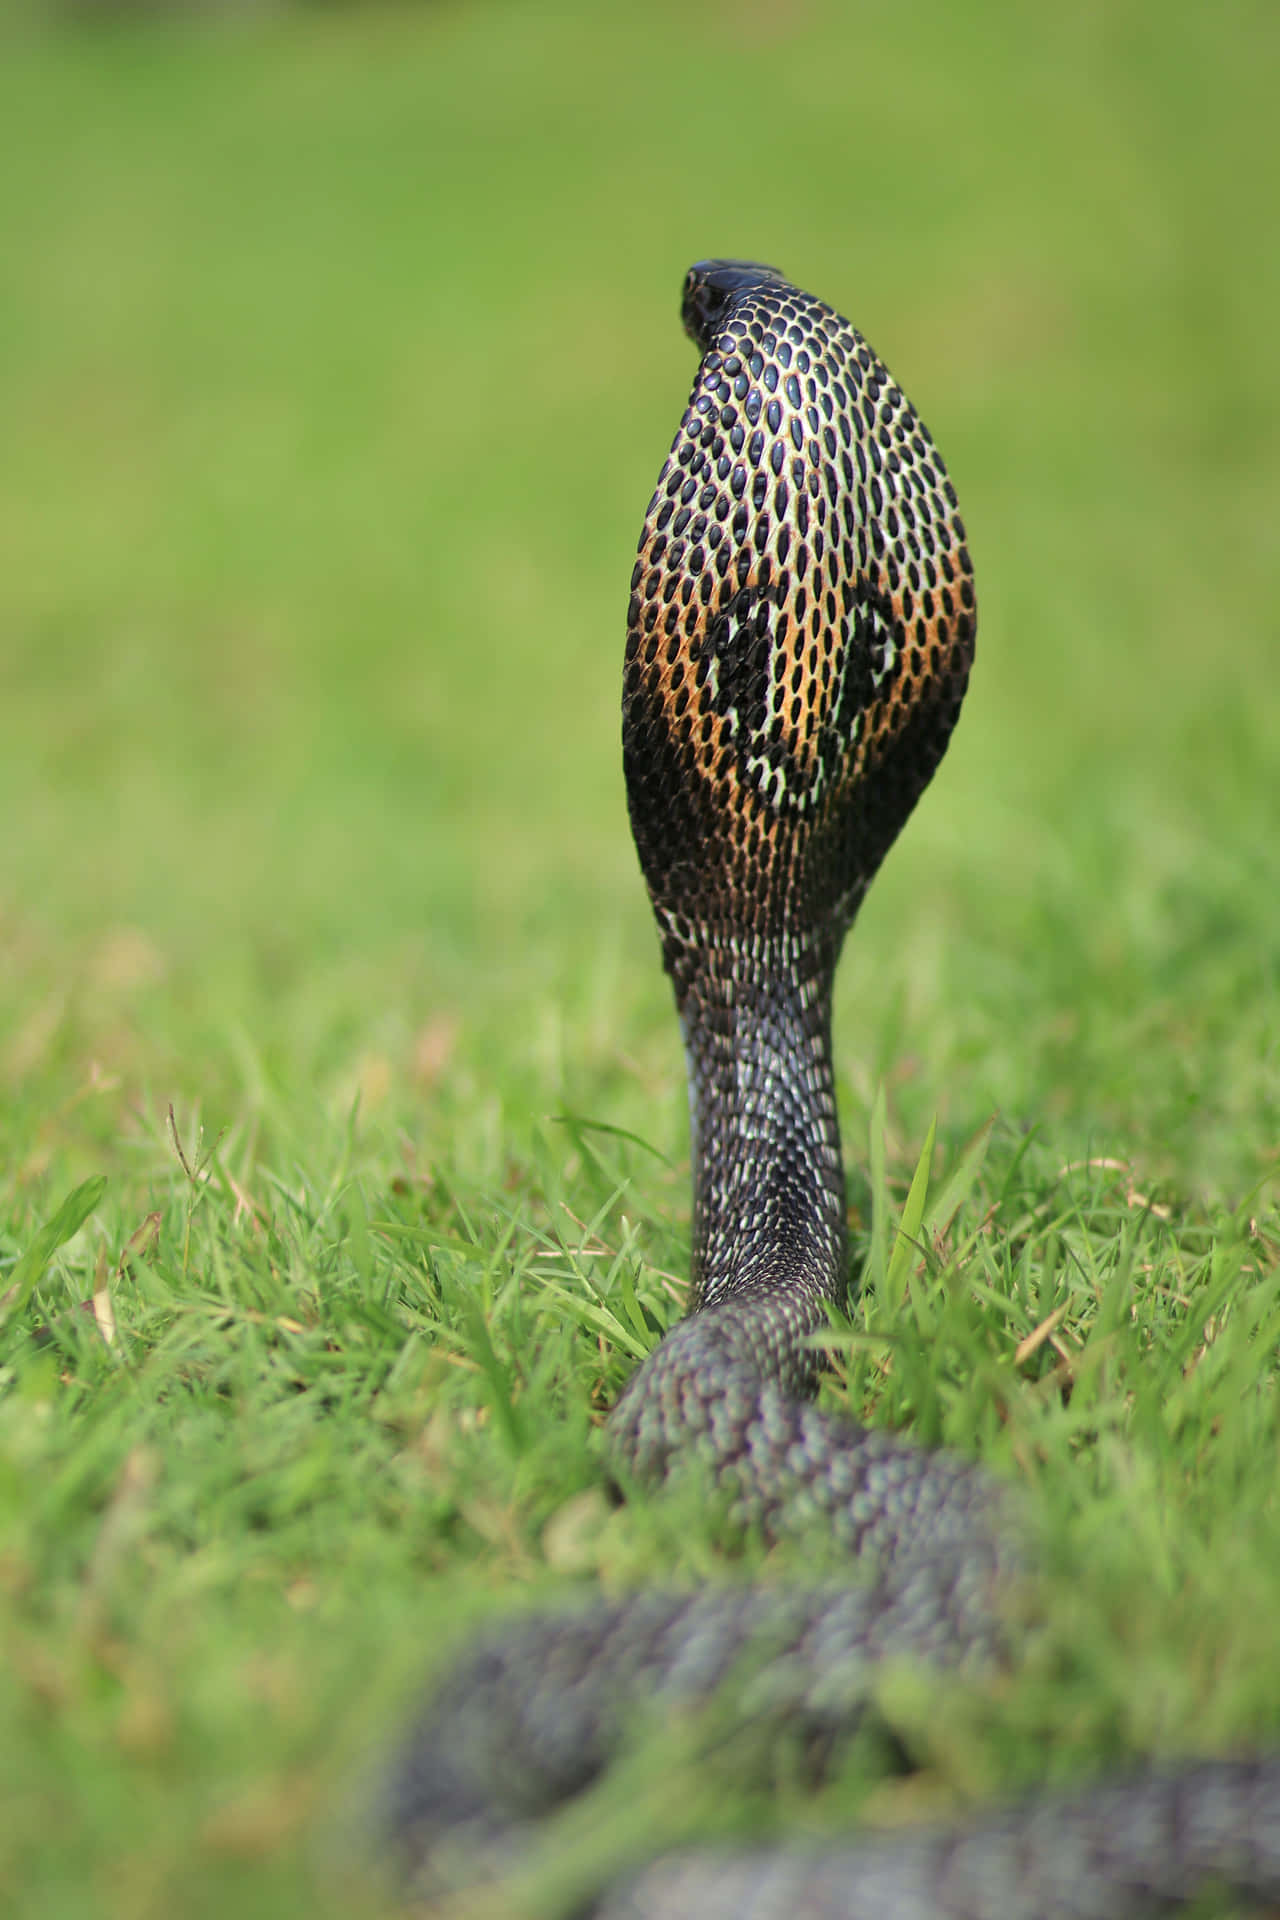 Stay at a Safe Distance from This King Cobra